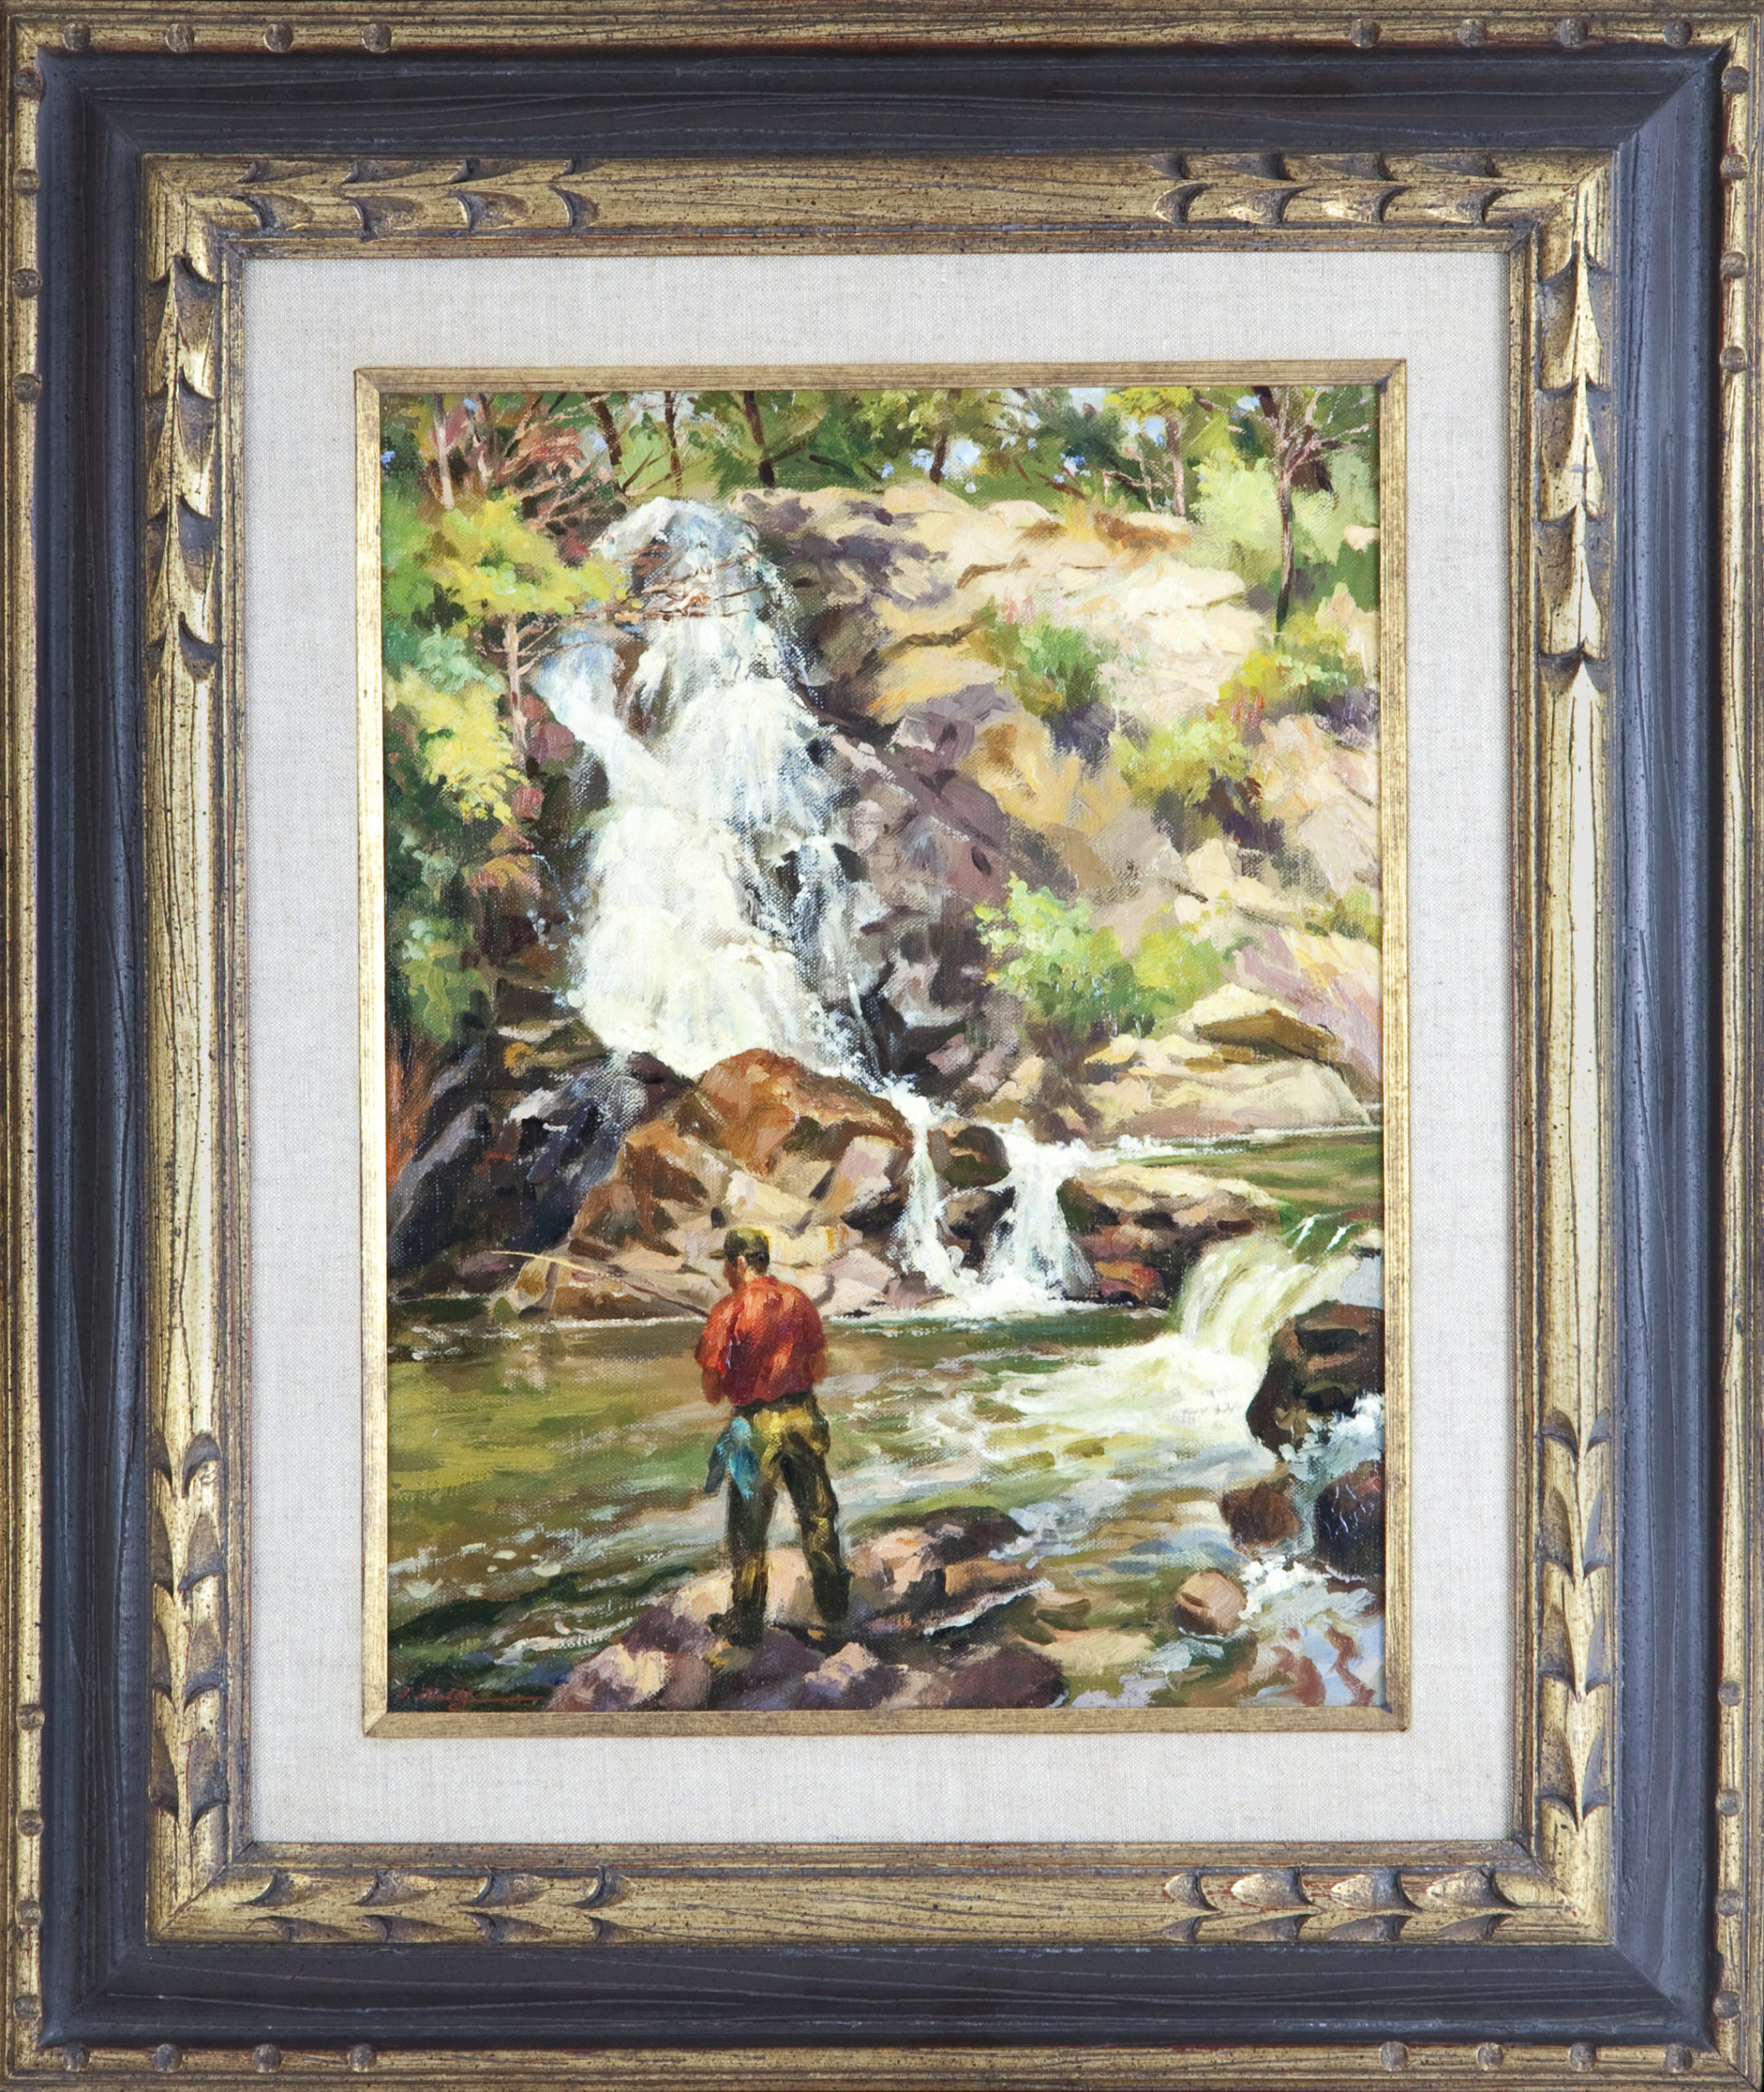 138 Trout Fisherman 1968 - Oil on Canvas - 12 x 16 - Frame: 21.25 x 25.25 x 2